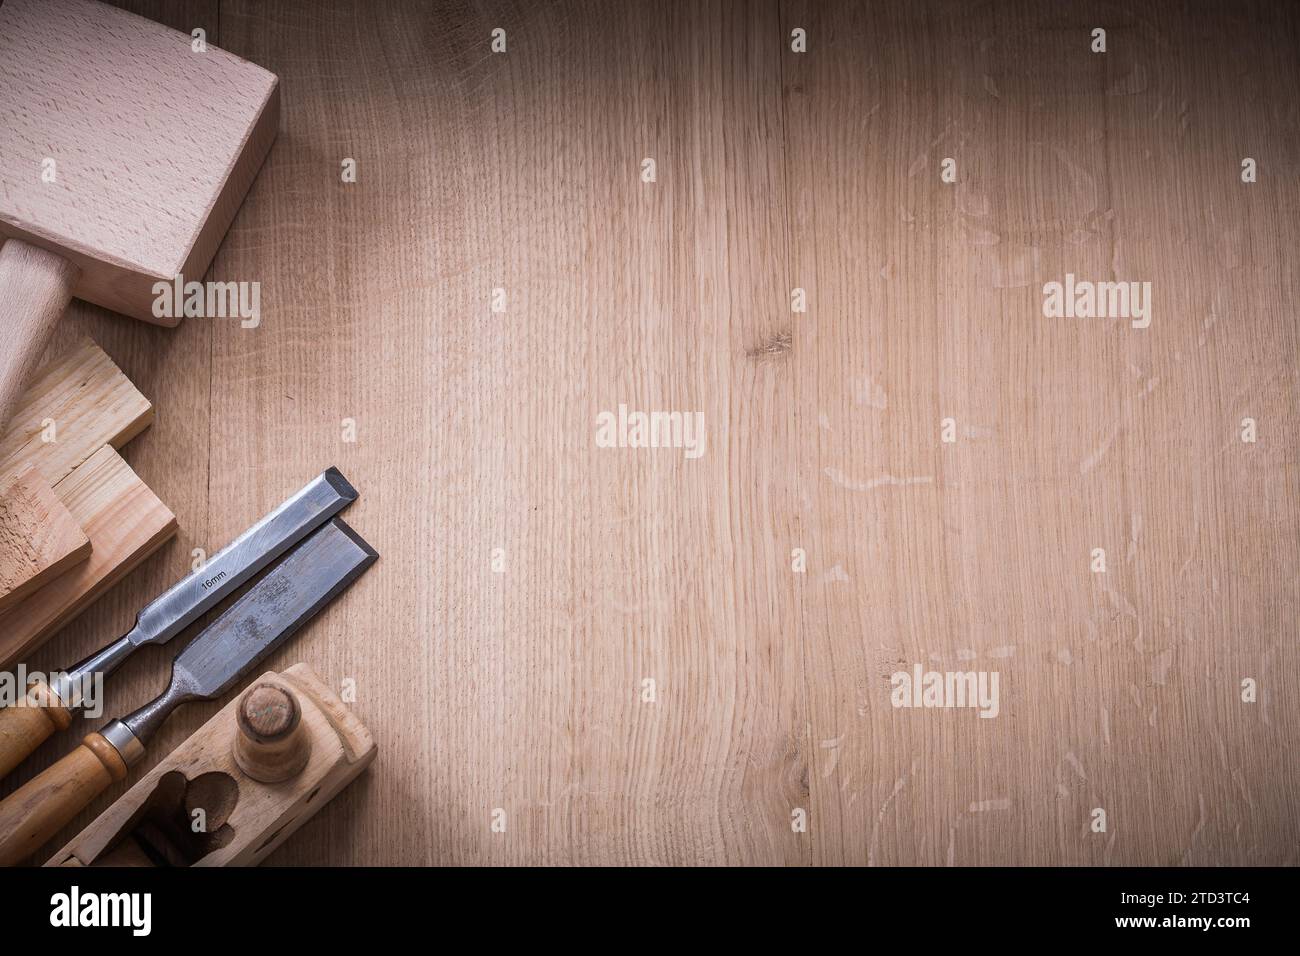 Copy space version of lump hammer planer metal chisels and wooden planks on wood board construction concept Stock Photo